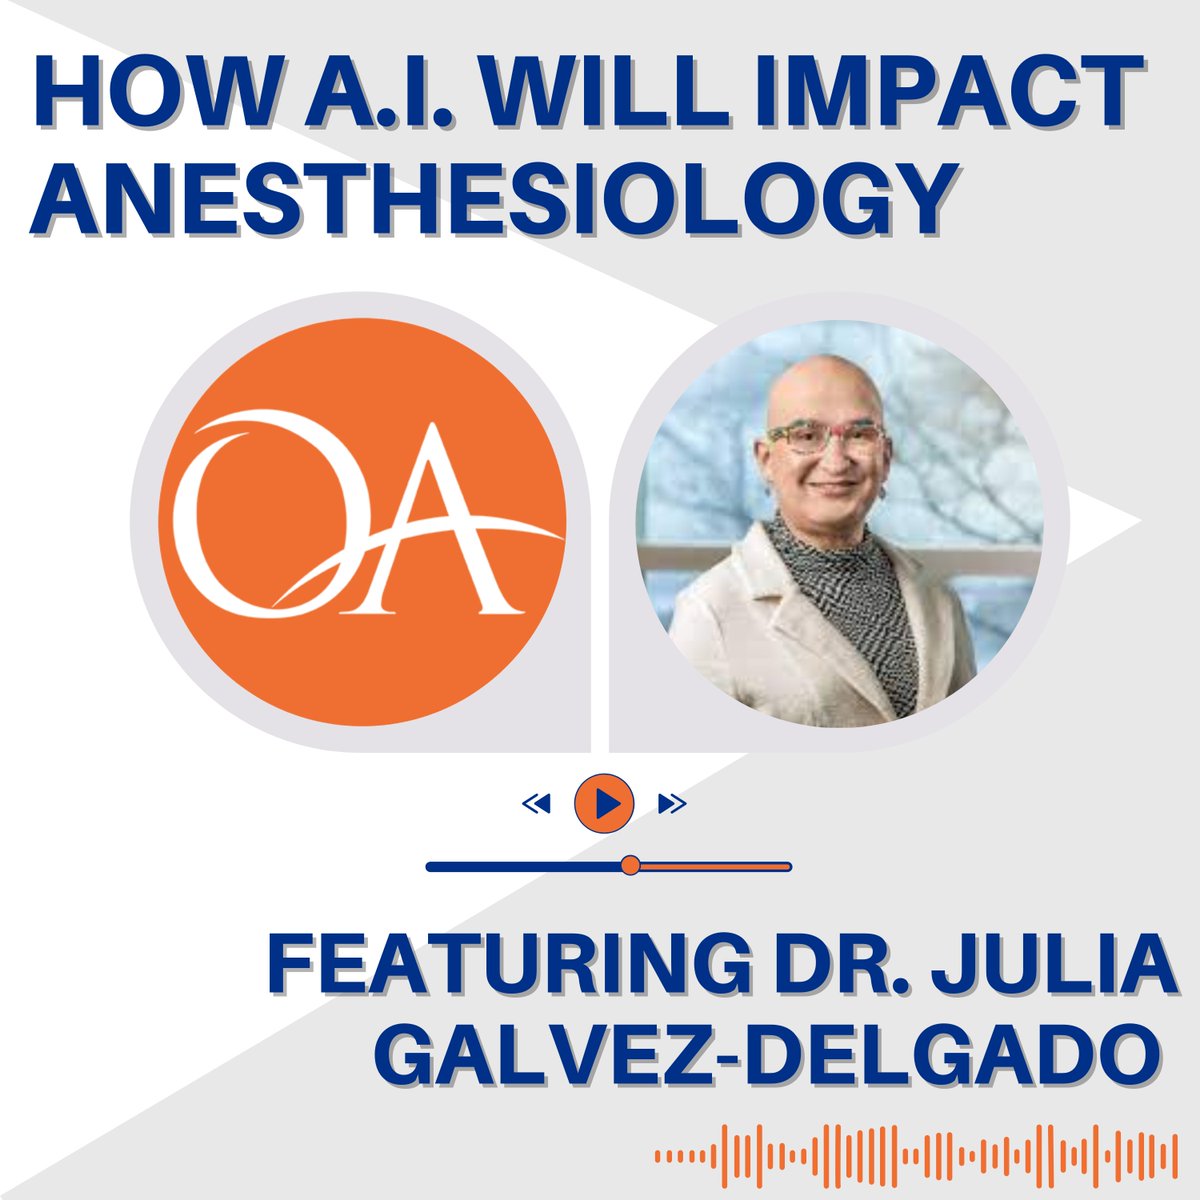 Recently, @bch_anesthesia very own Dr. Julia Galvez-Delgado was interviewed on the OpenAnesthesia Podcast by their associate editor, Dr. Elisha Peterson, and spoke about how AI will impact anesthesiology. Give it a listen for yourself! rb.gy/vd9o9k